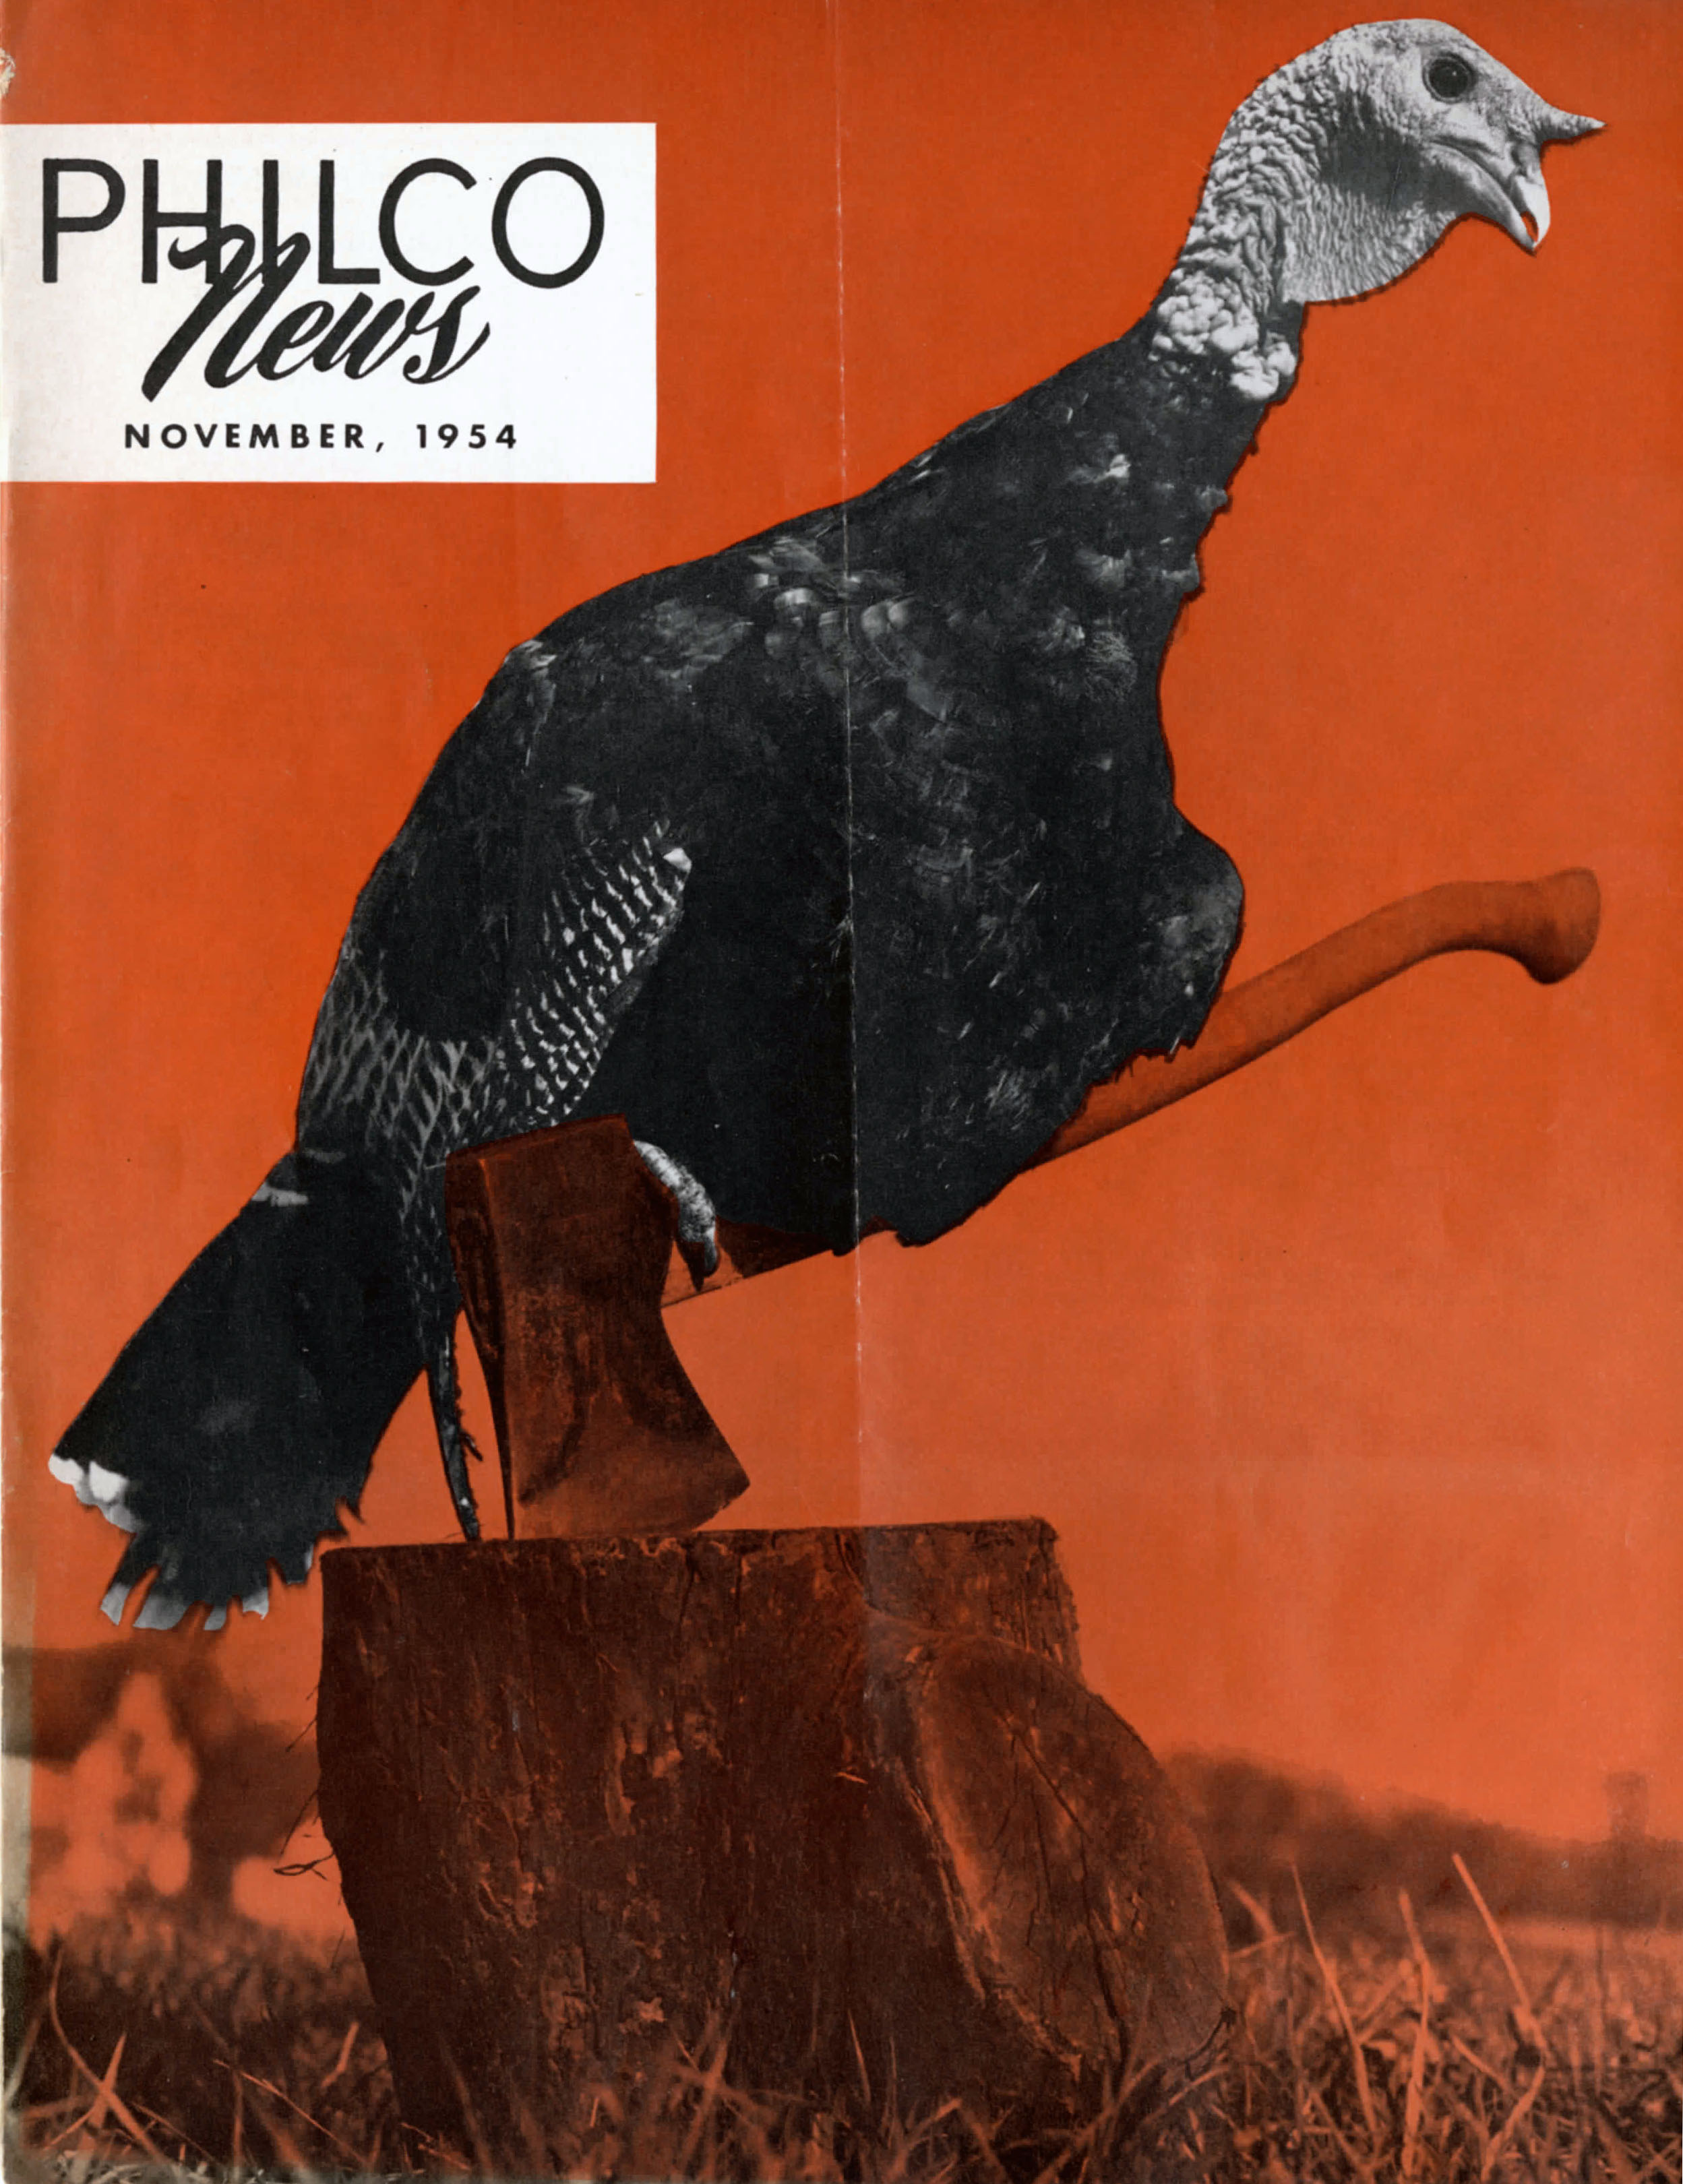 Cover of a November 1954 issue of Philco News featuring a turkey.